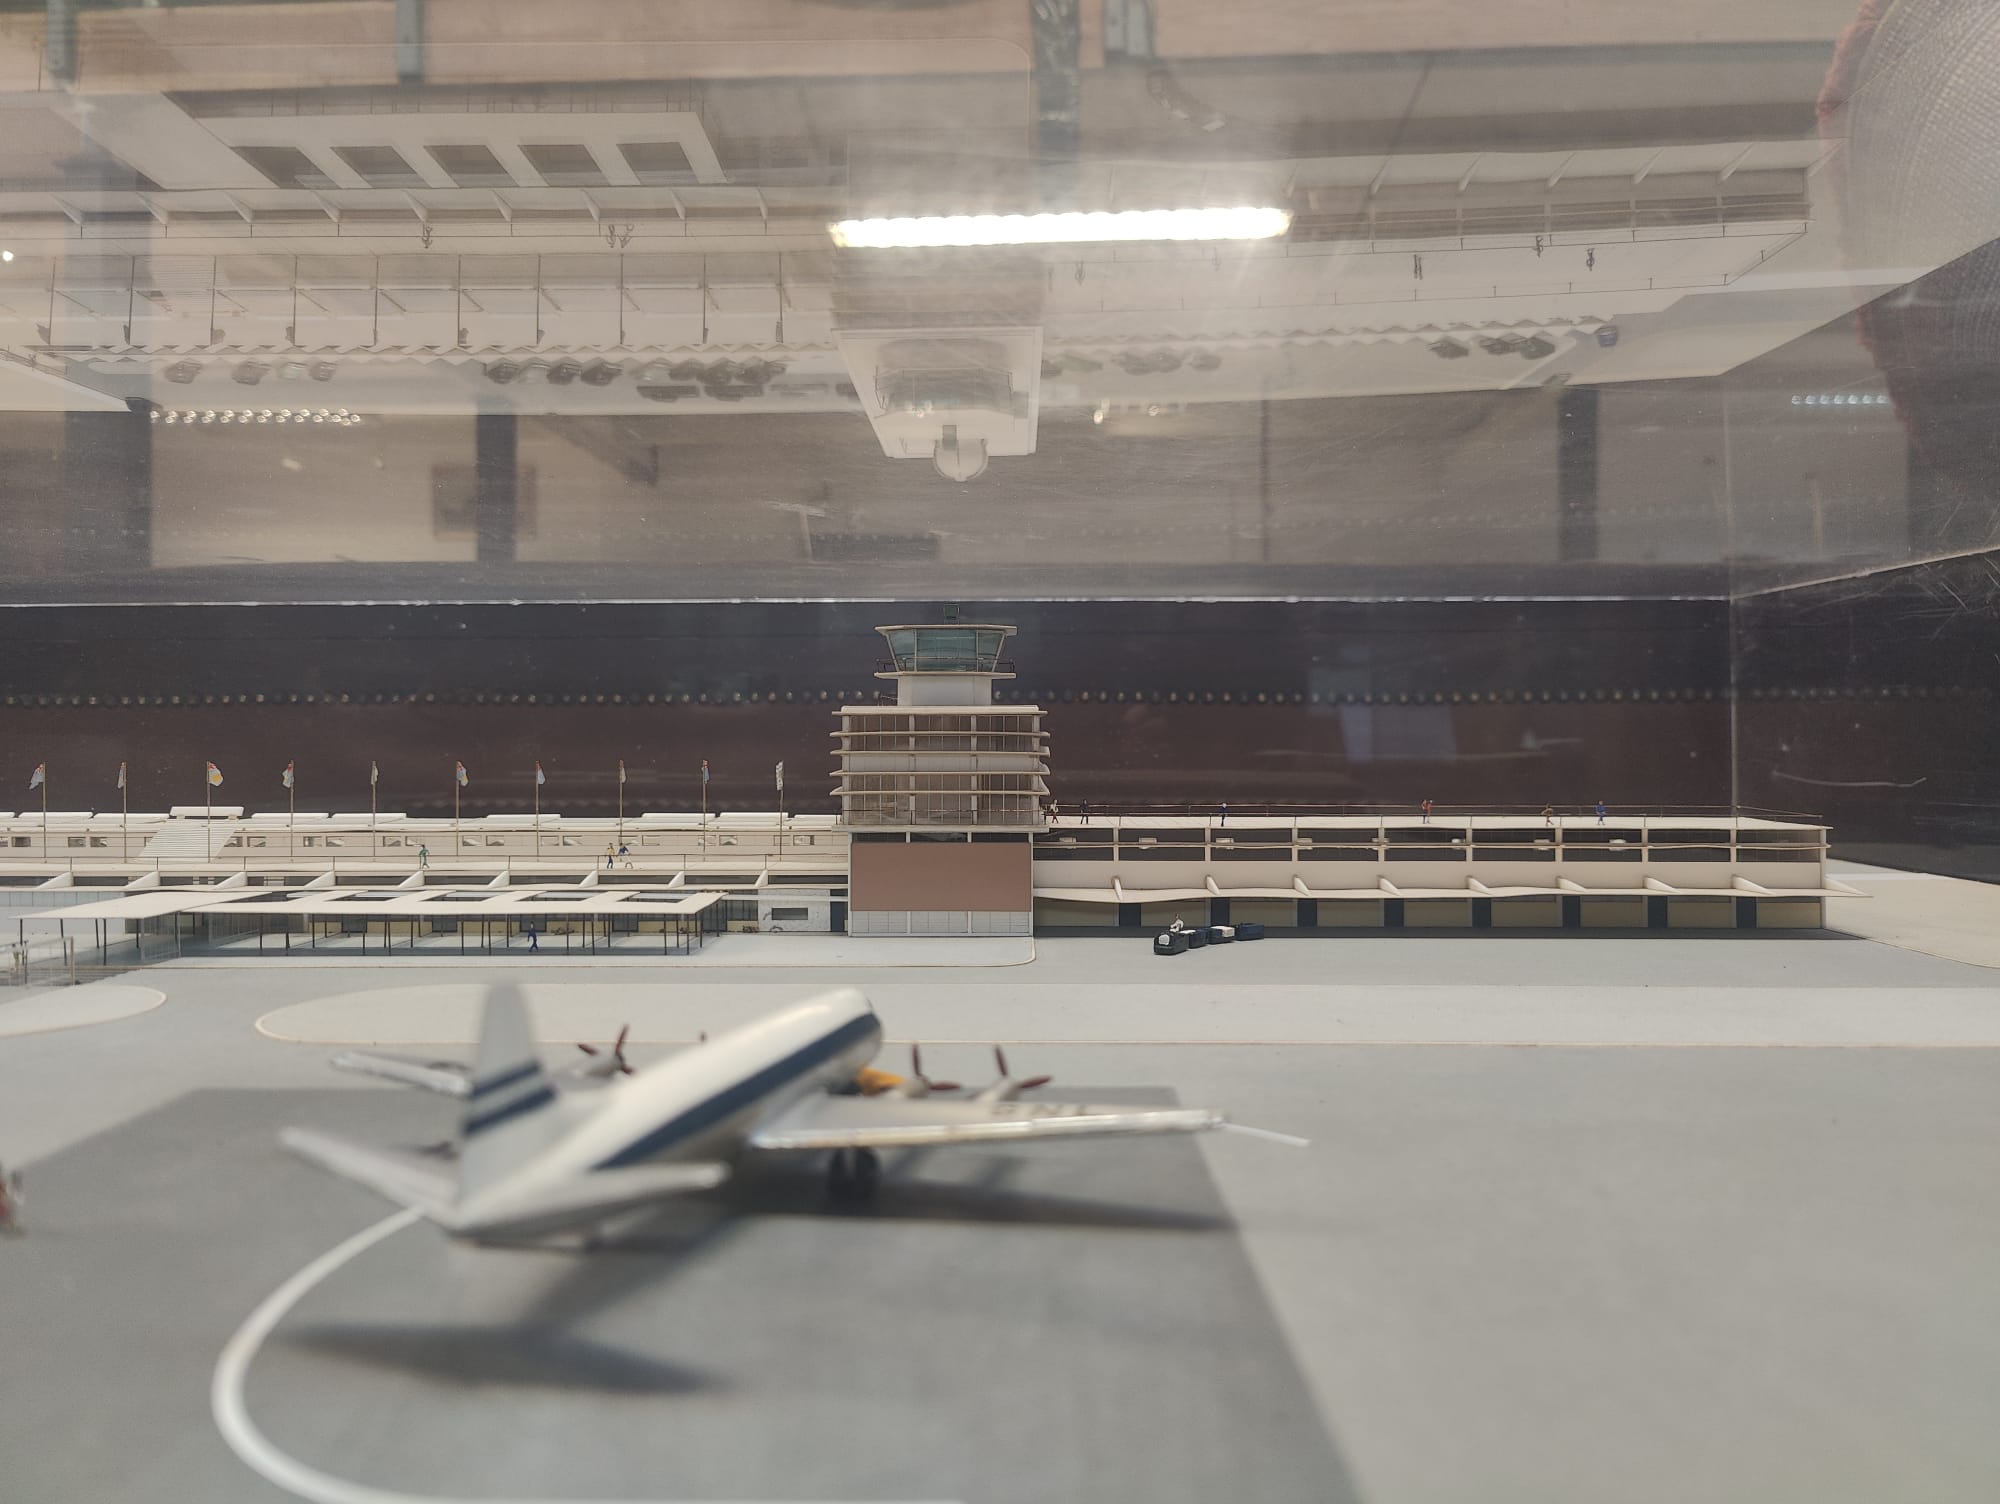 NORMAN & DAWBURN ARCHITECT'S MODEL OF PALISADOES AIRPORT - Image 8 of 9